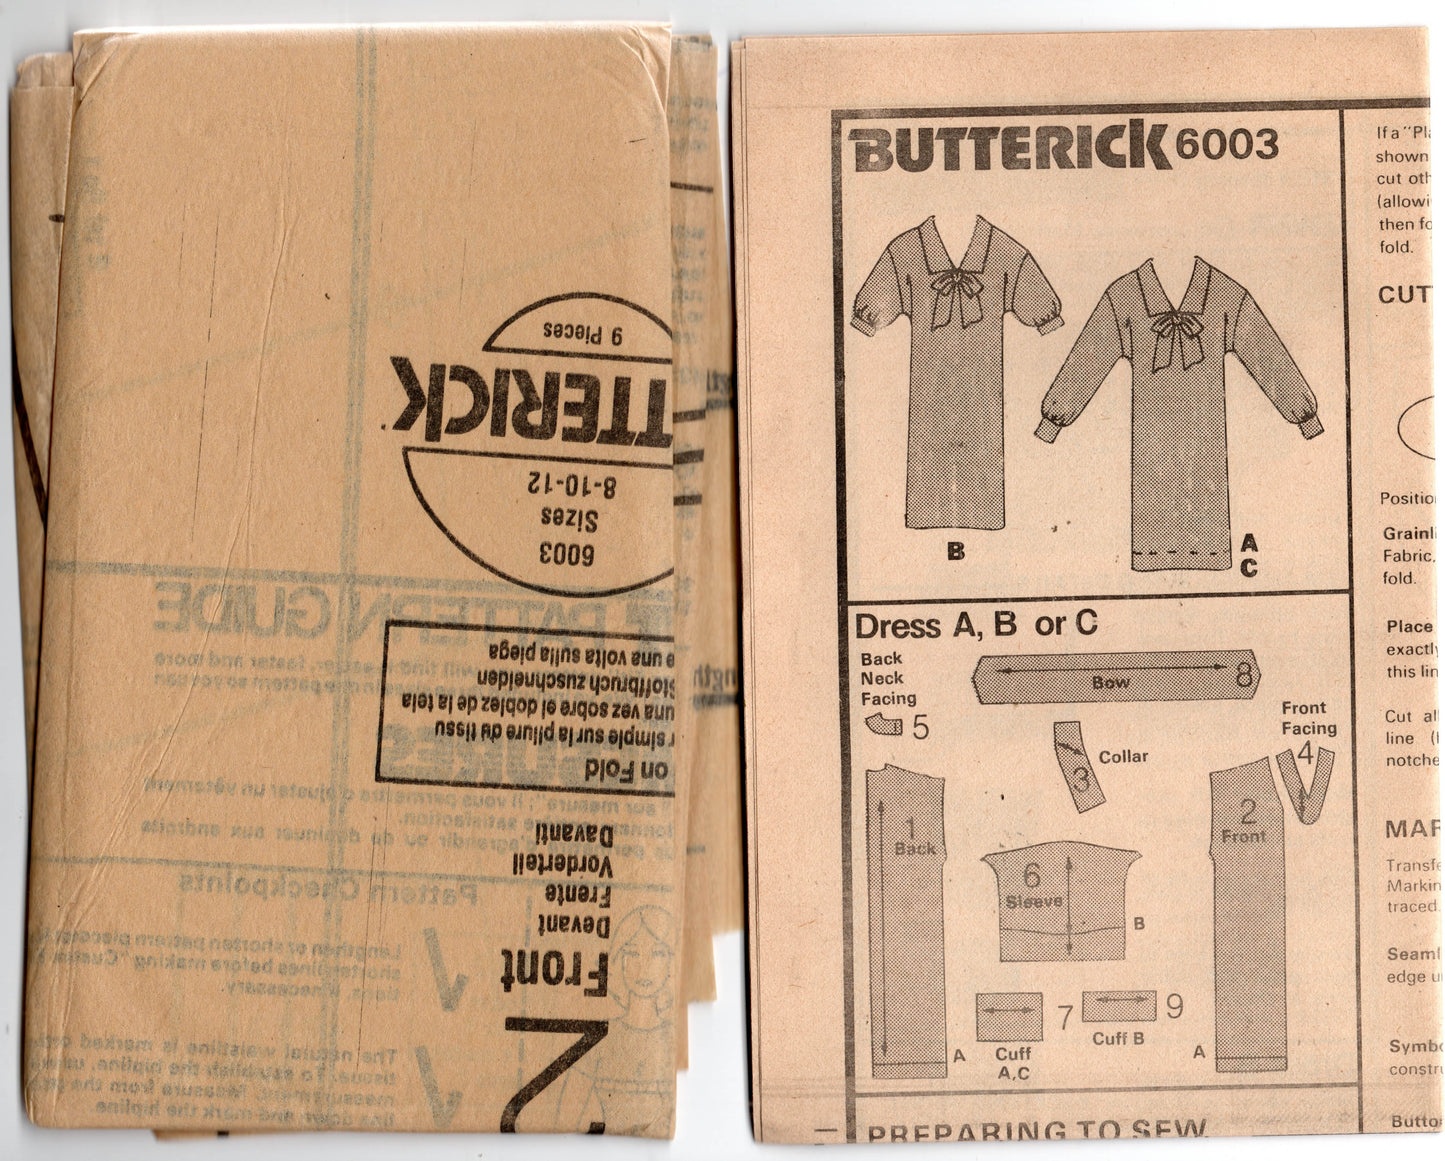 Butterick 6003 Womens Loose Fitting Dress with Collar & Tie 1980s Vintage Sewing Pattern Size 8 - 12 UNCUT Factory Folded